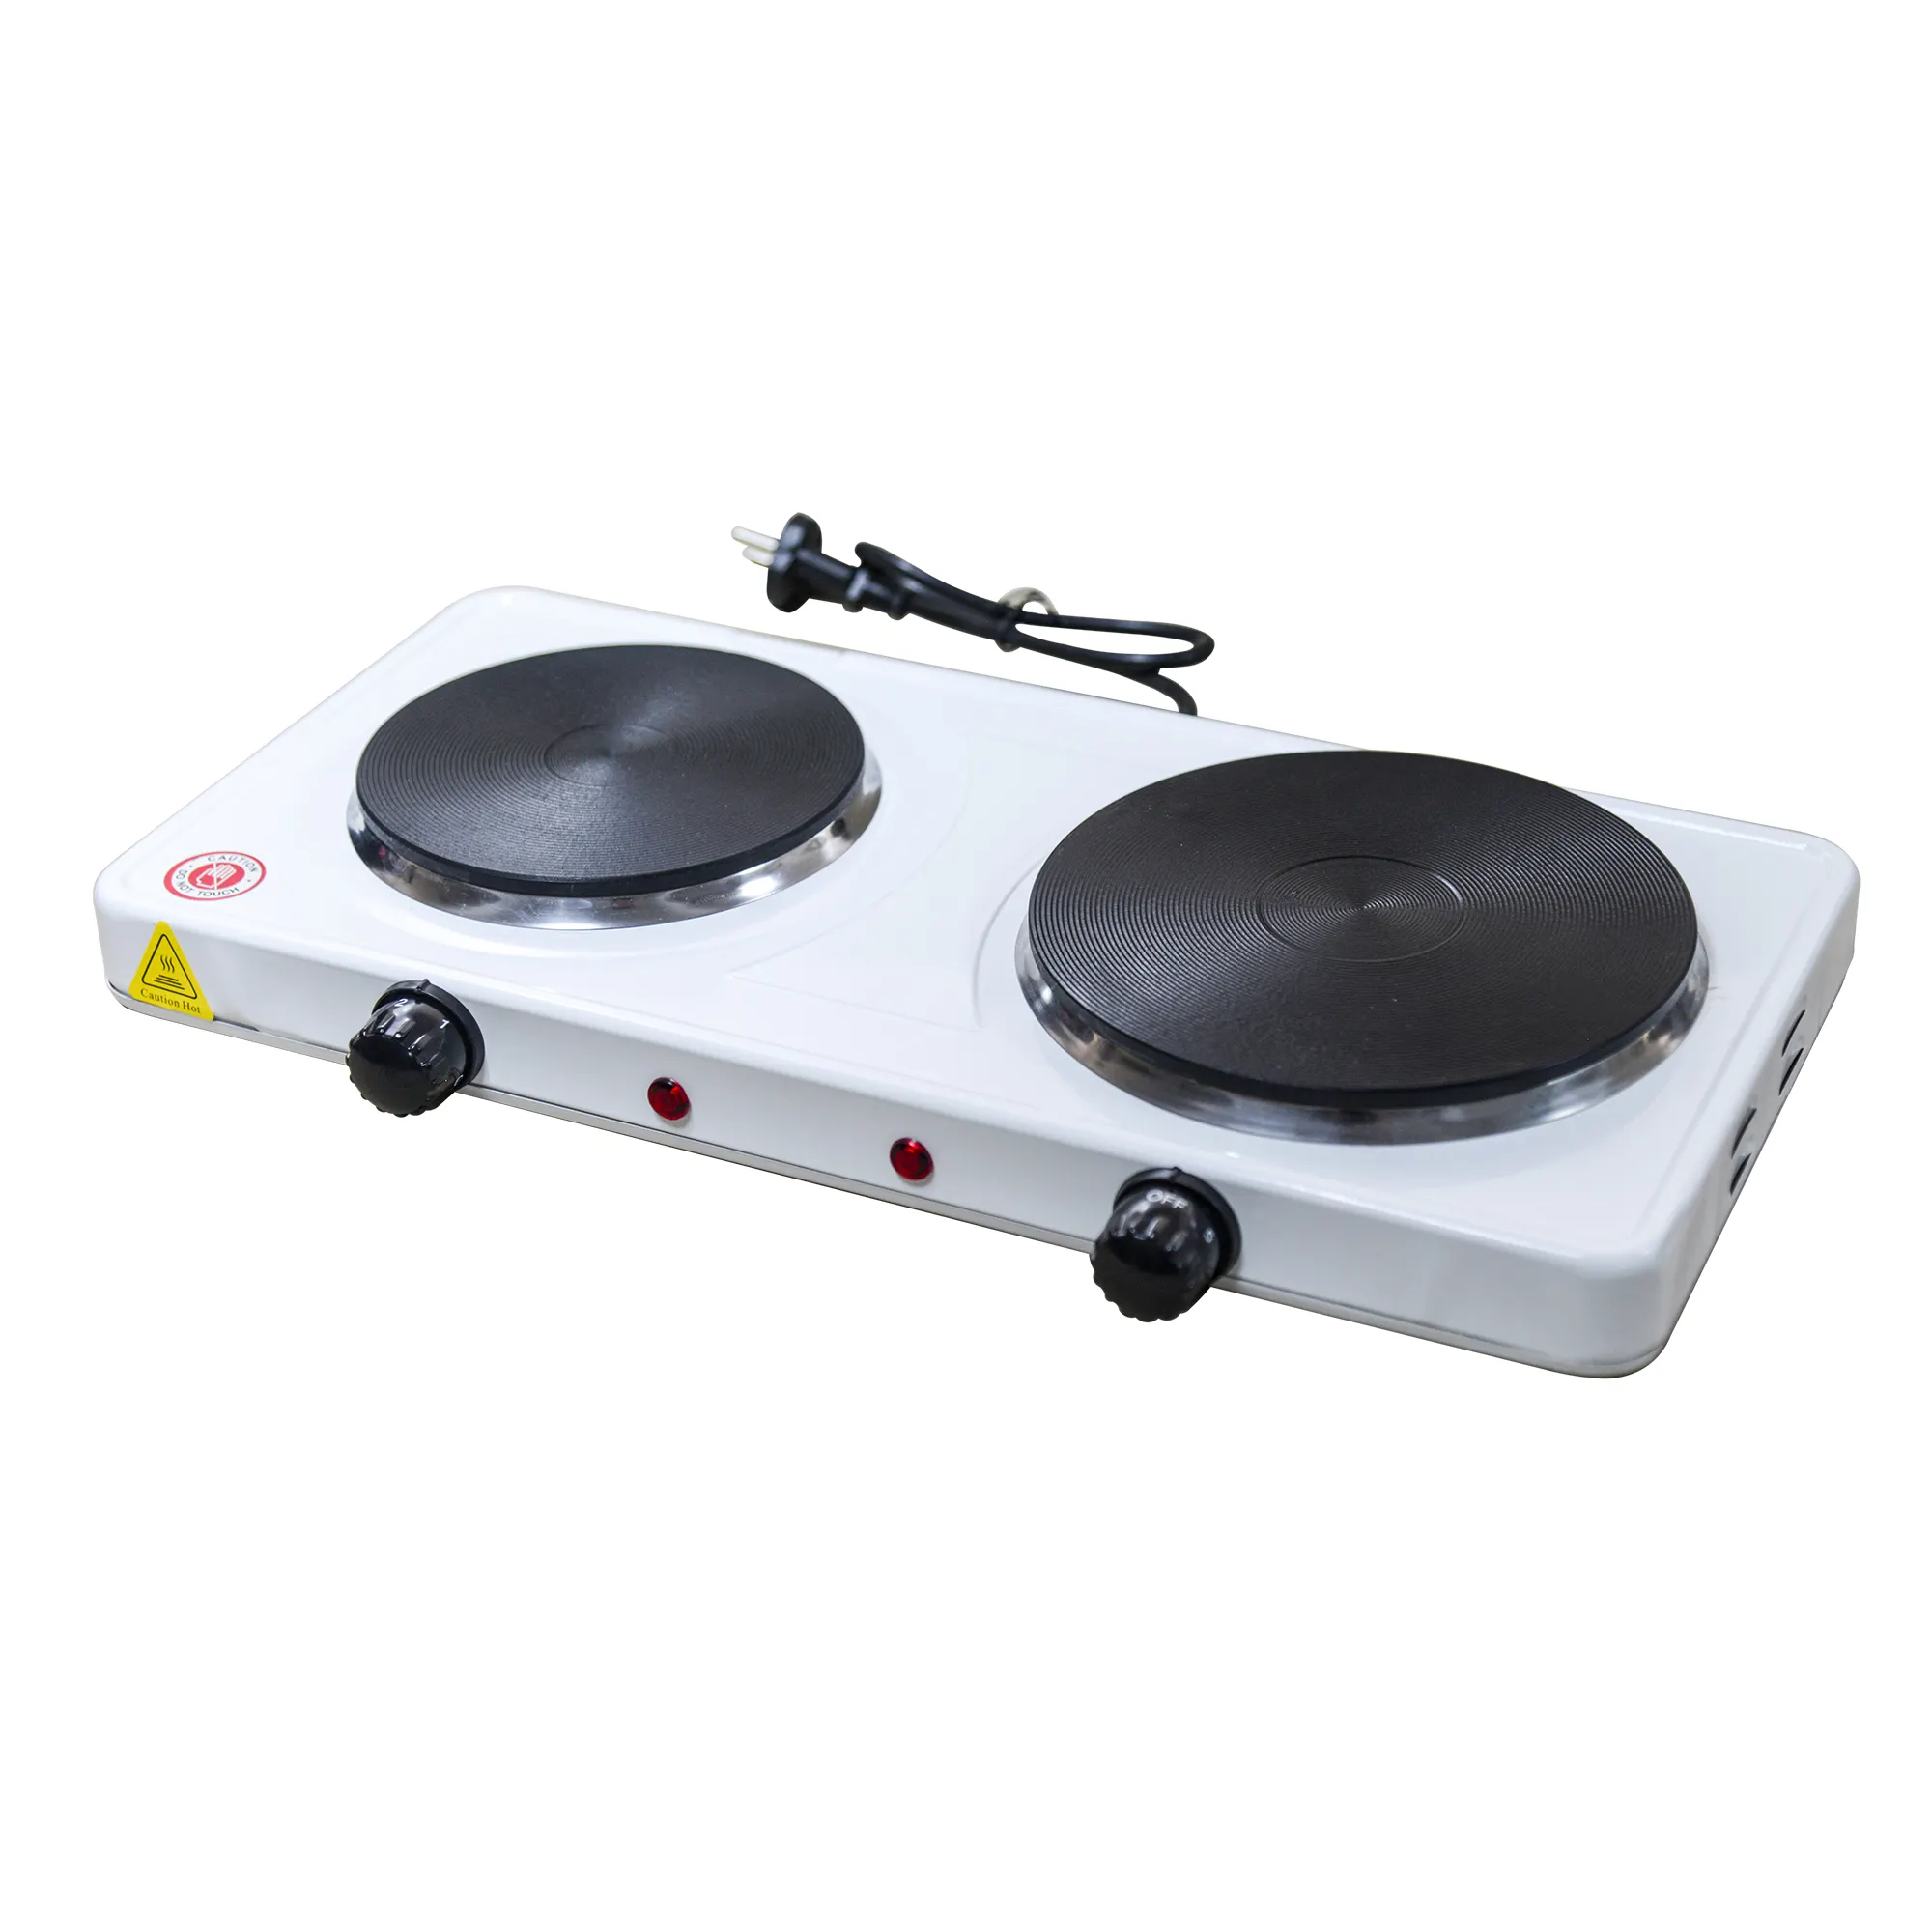 Double Hot Plates  Hot Plates for Cooking Portable Electric Double Burner  White Stainless Steel Burner